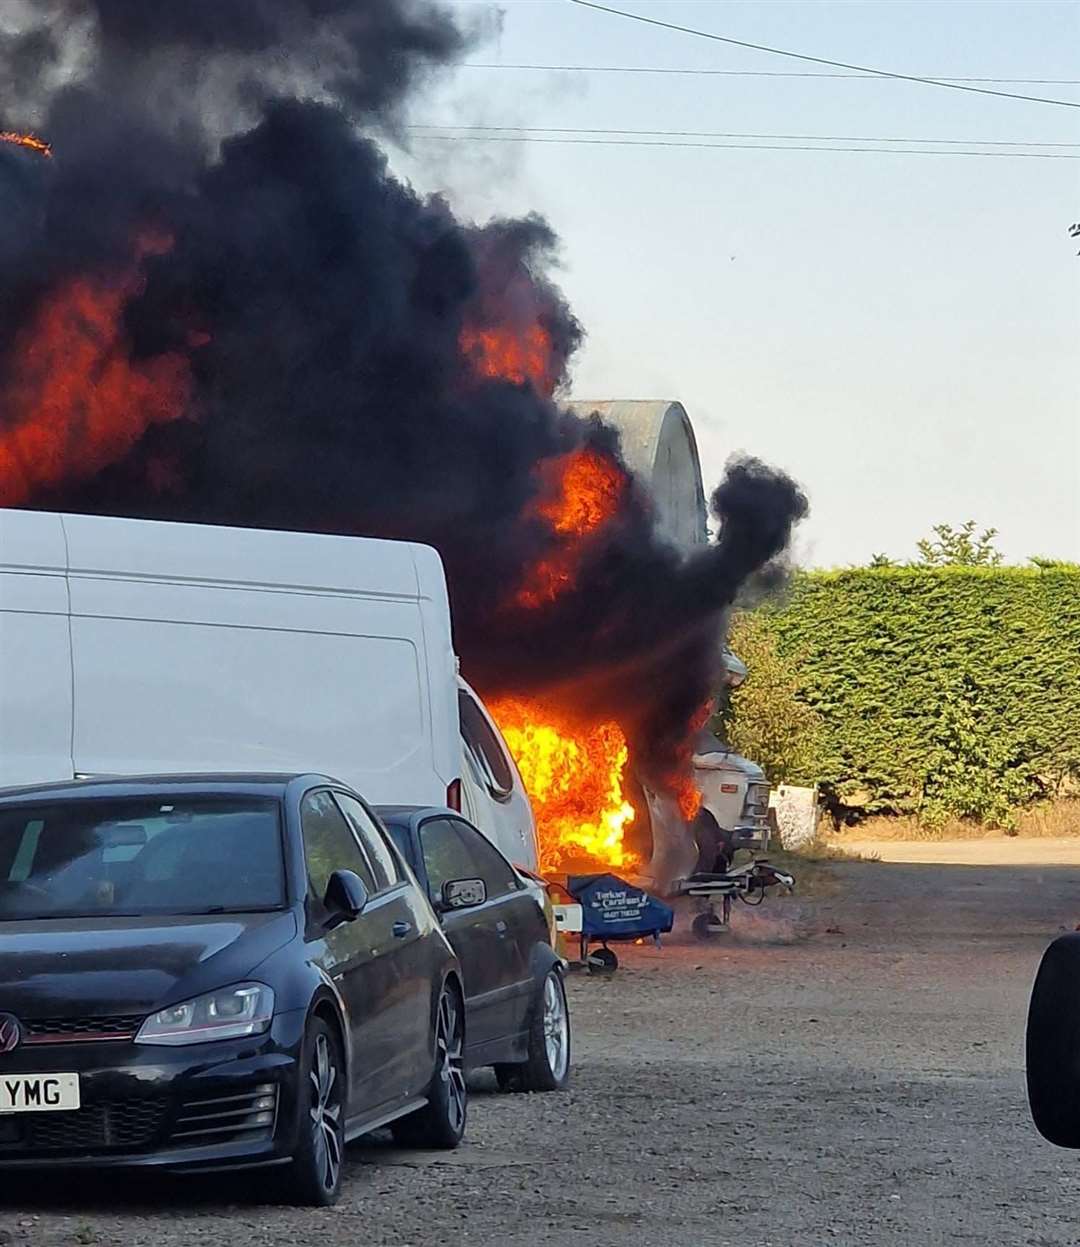 The fire in Birchwood Road, Dartford has destroyed several vehicles. Photo: Danny Russell